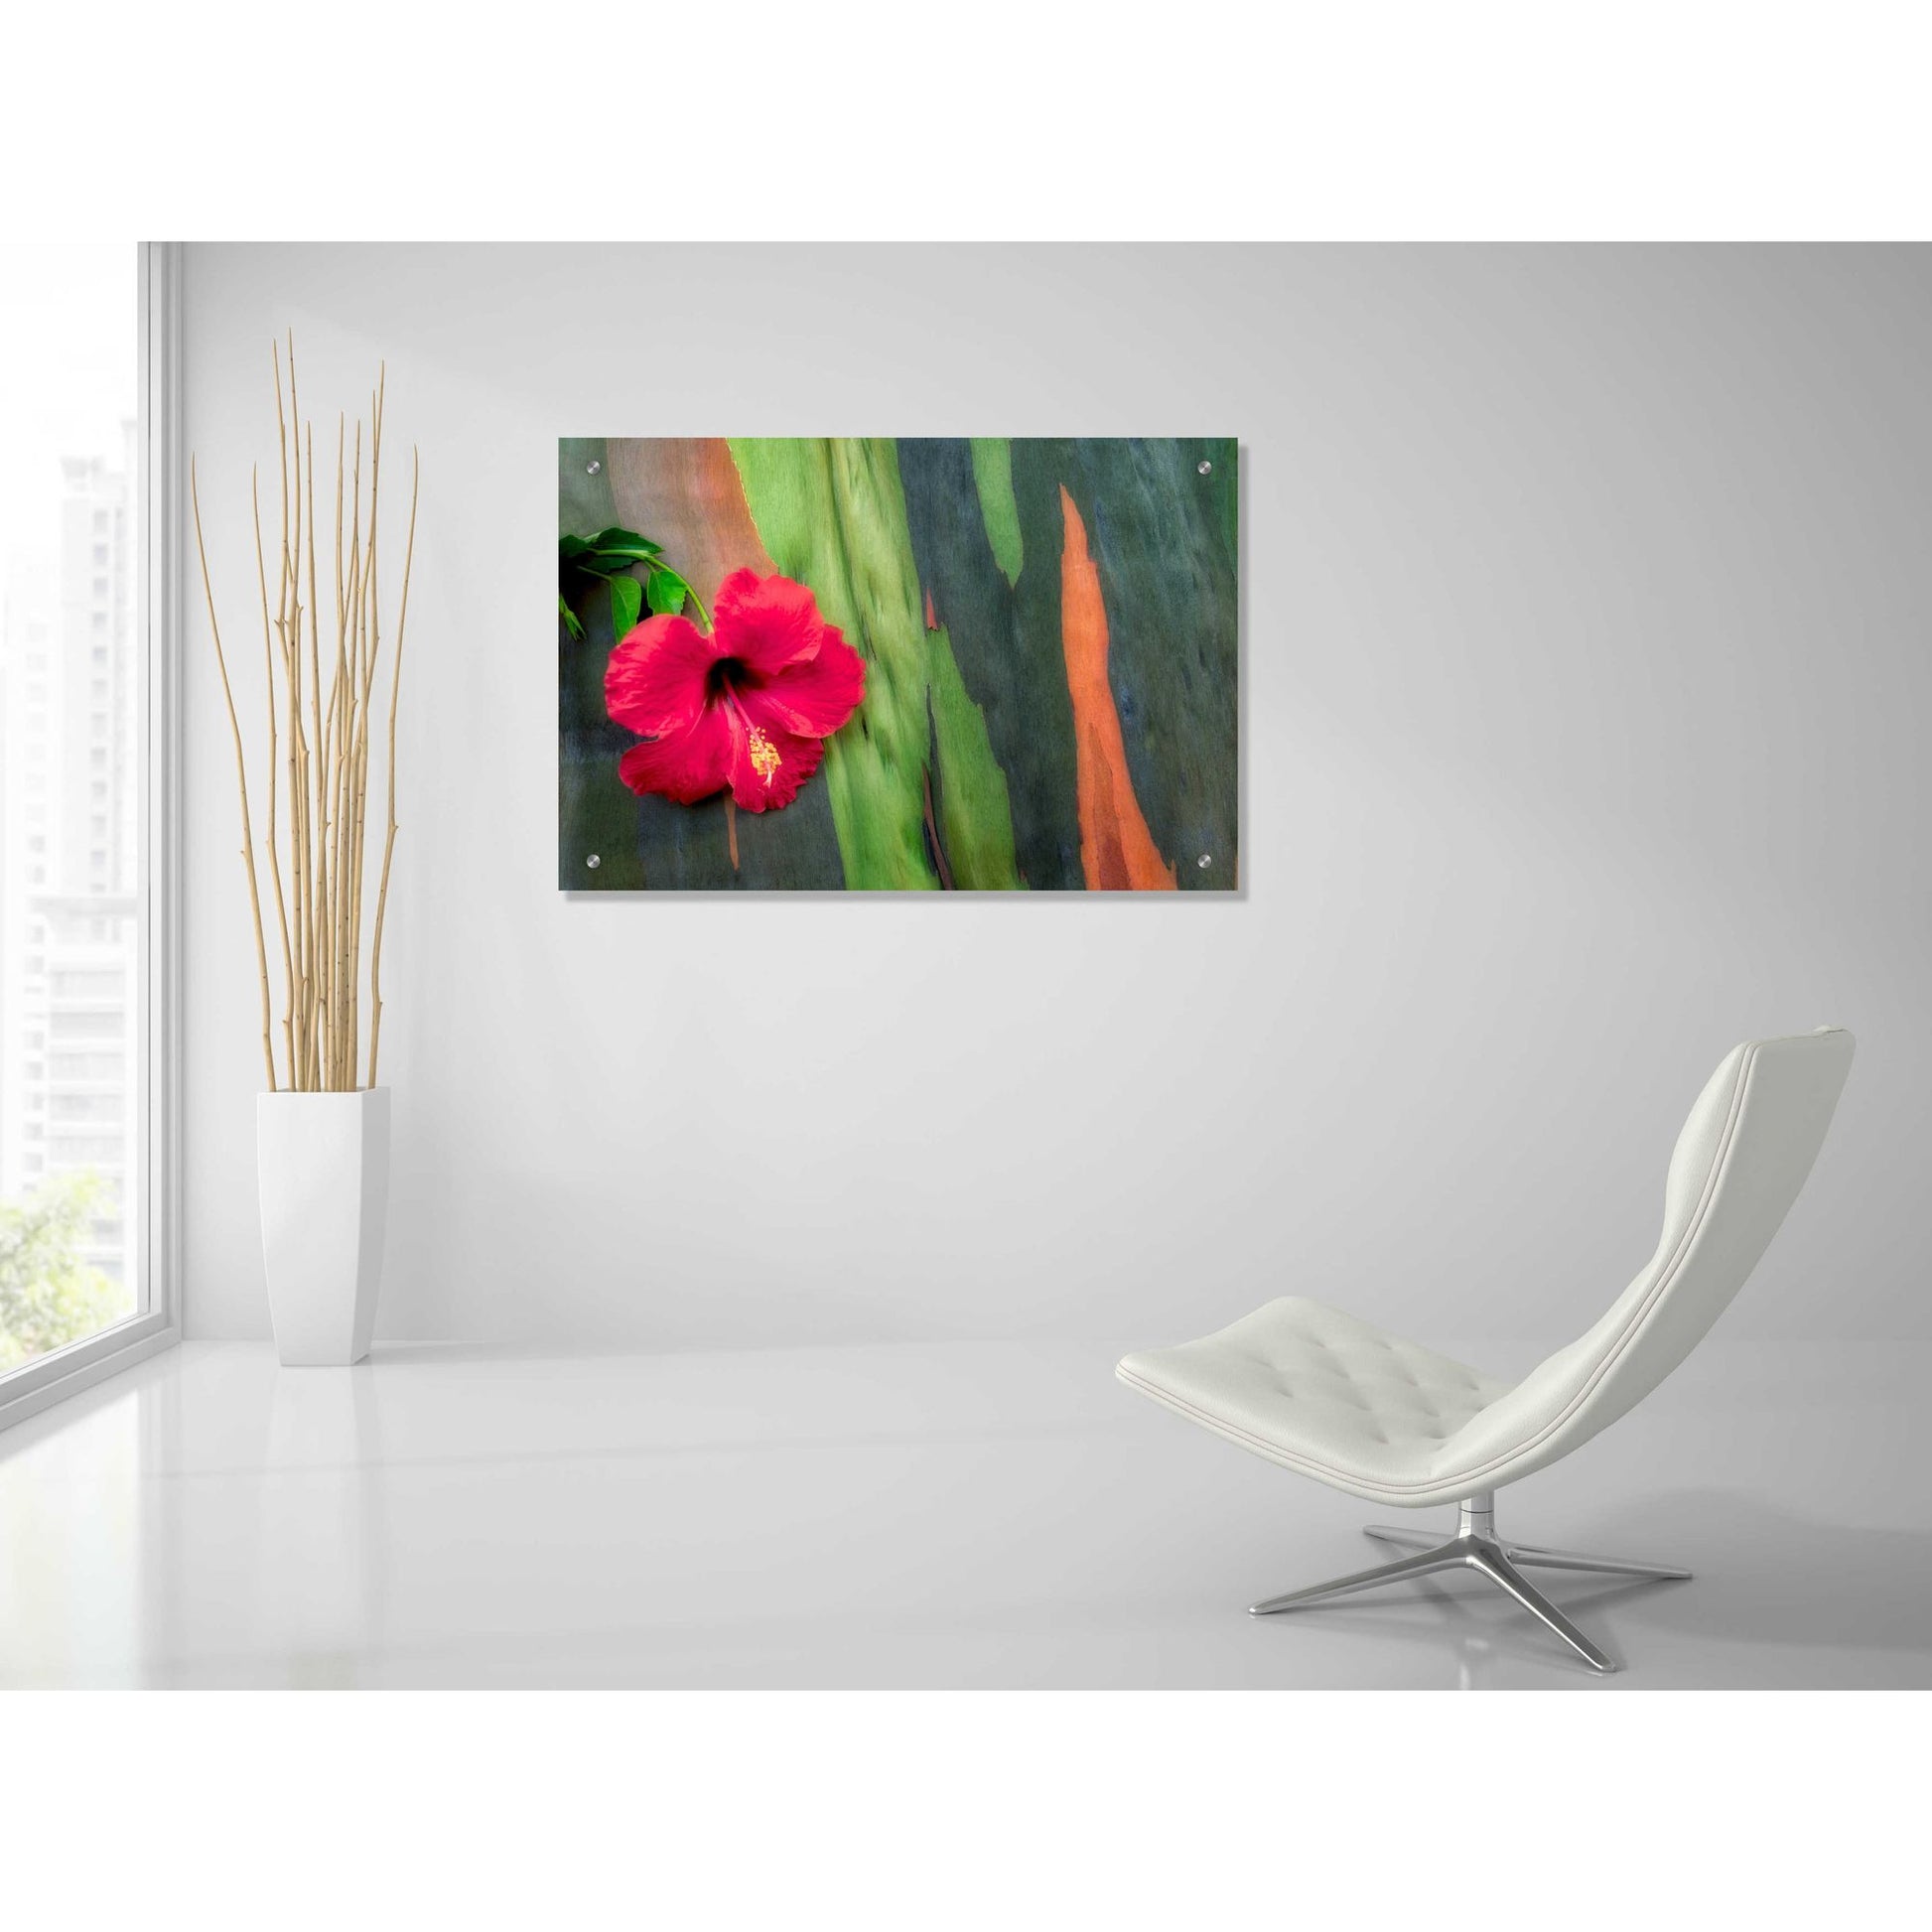 Epic Art 'Hibiscus' by Dennis Frates, Acrylic Glass Wall Art,36x24